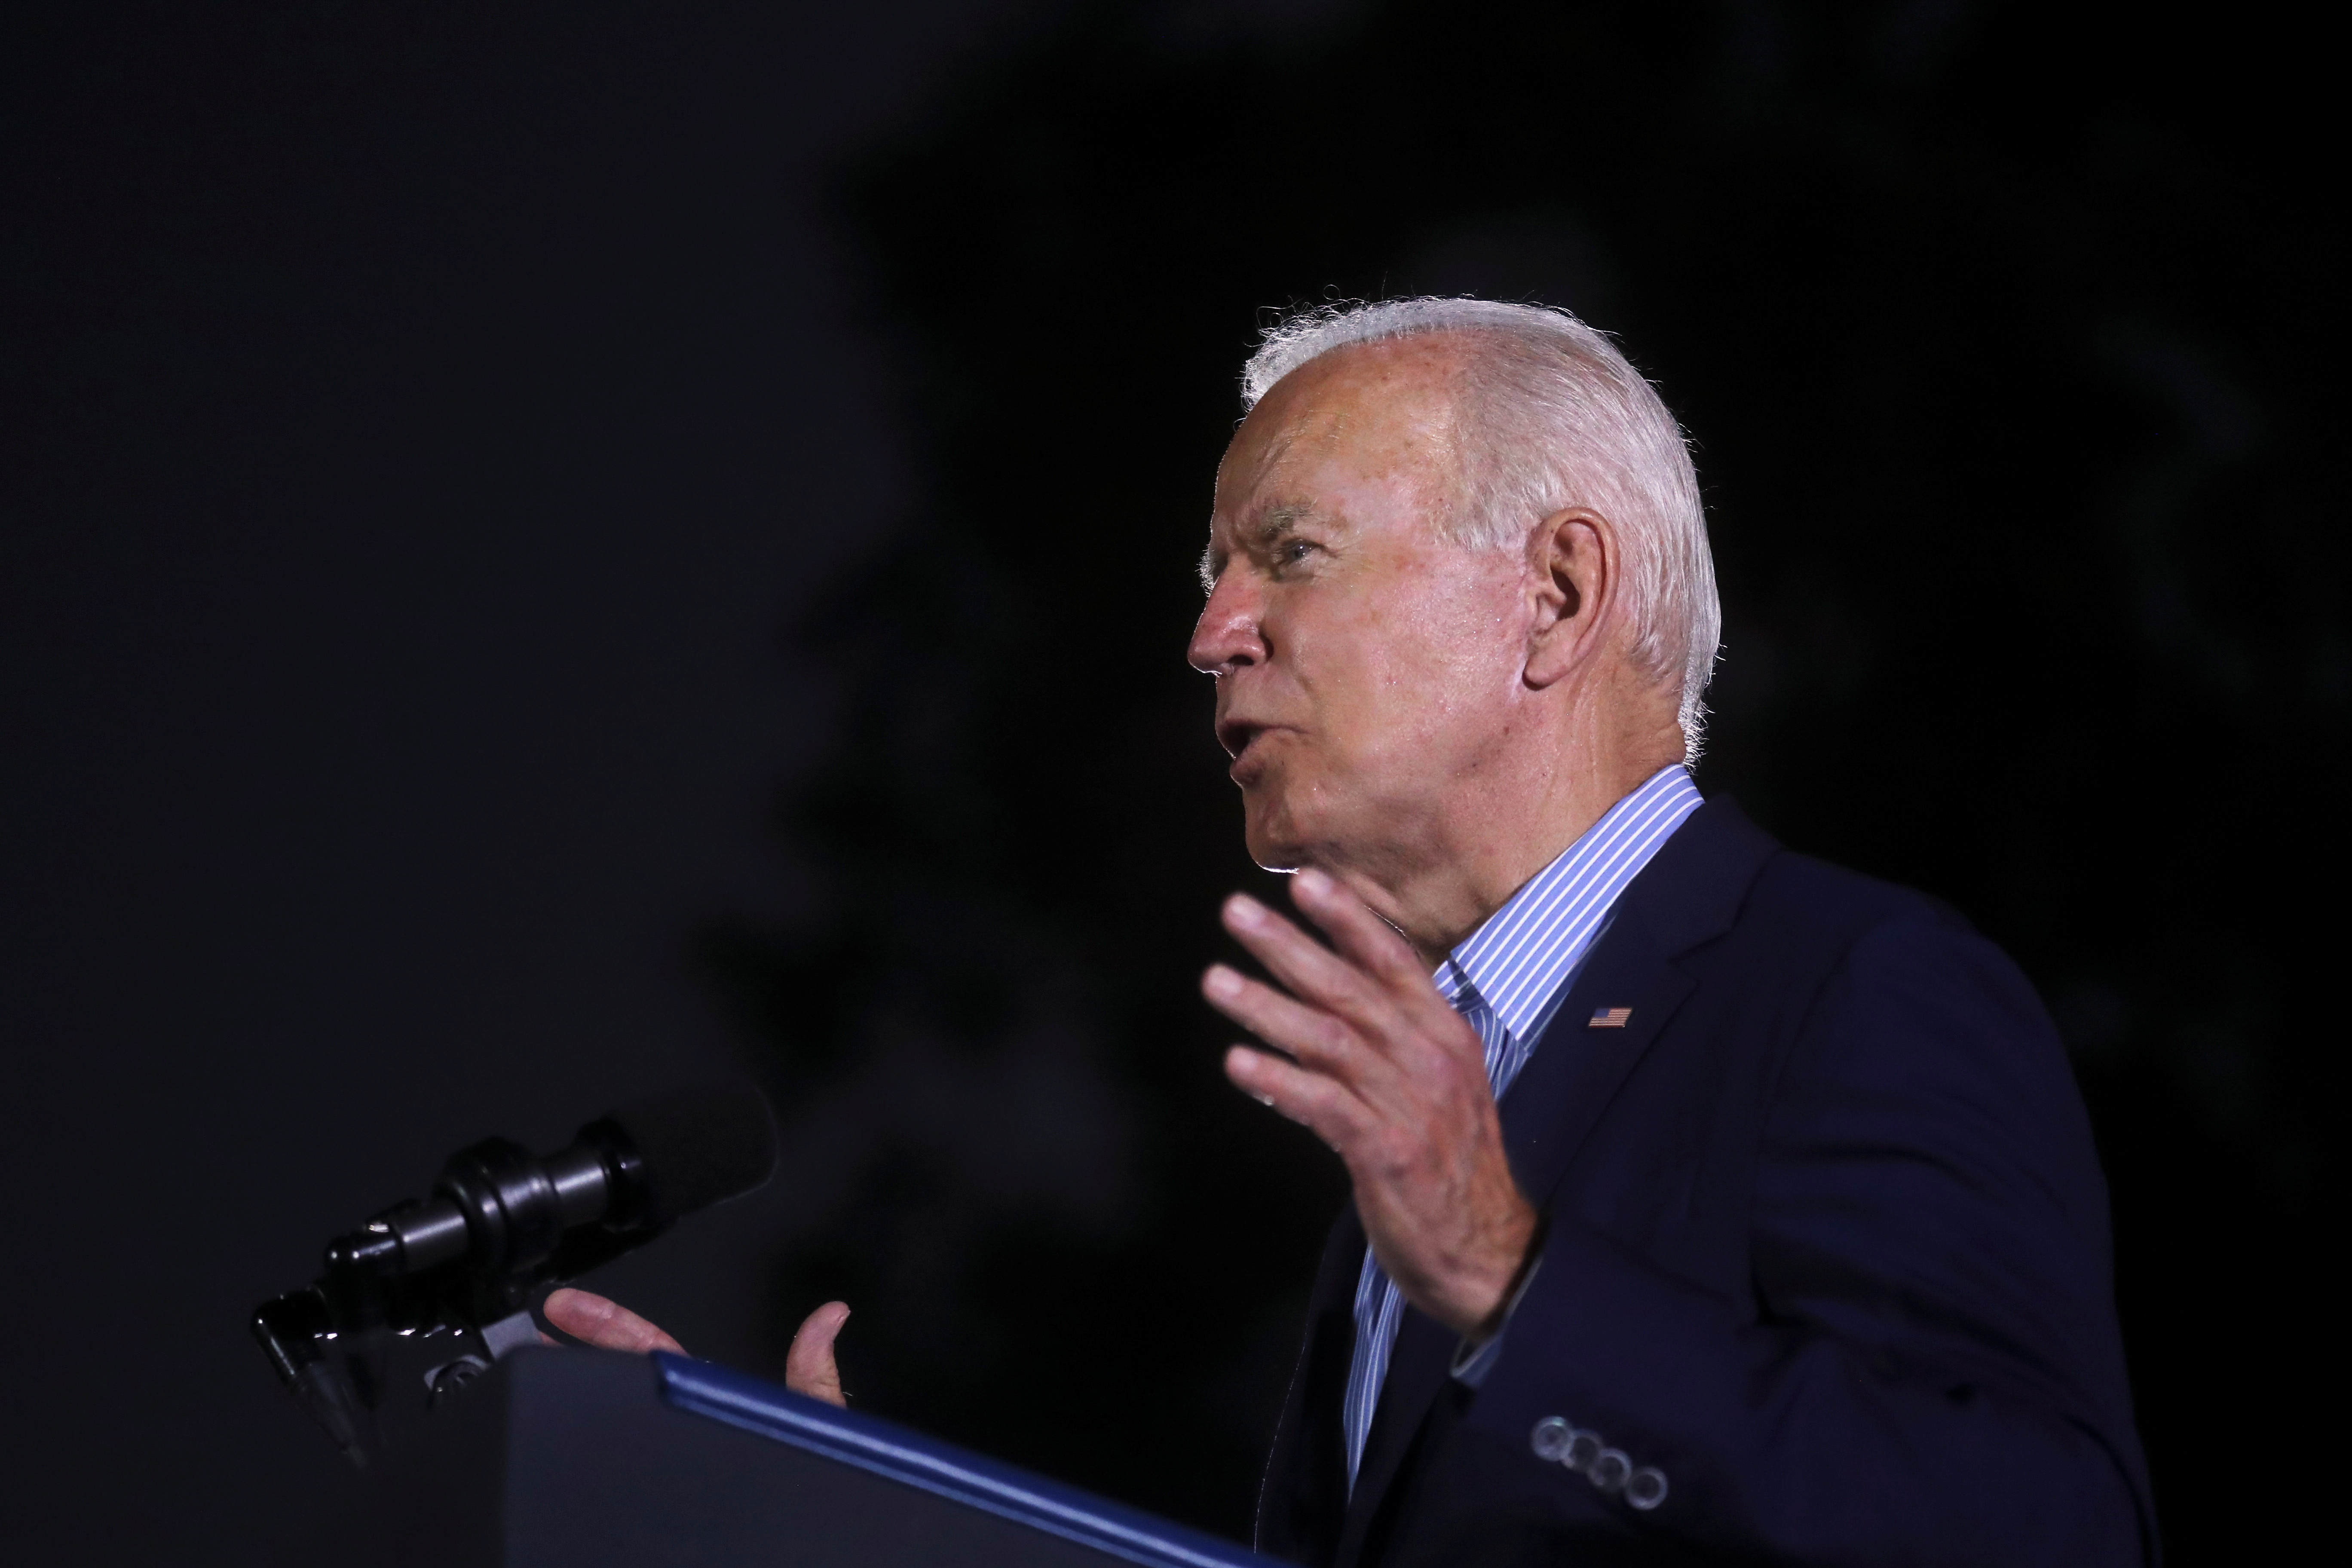 U.S. President Joe Biden delivers remarks at a campaign rally with California Governor Gavin Newsom, in Long Beach, California